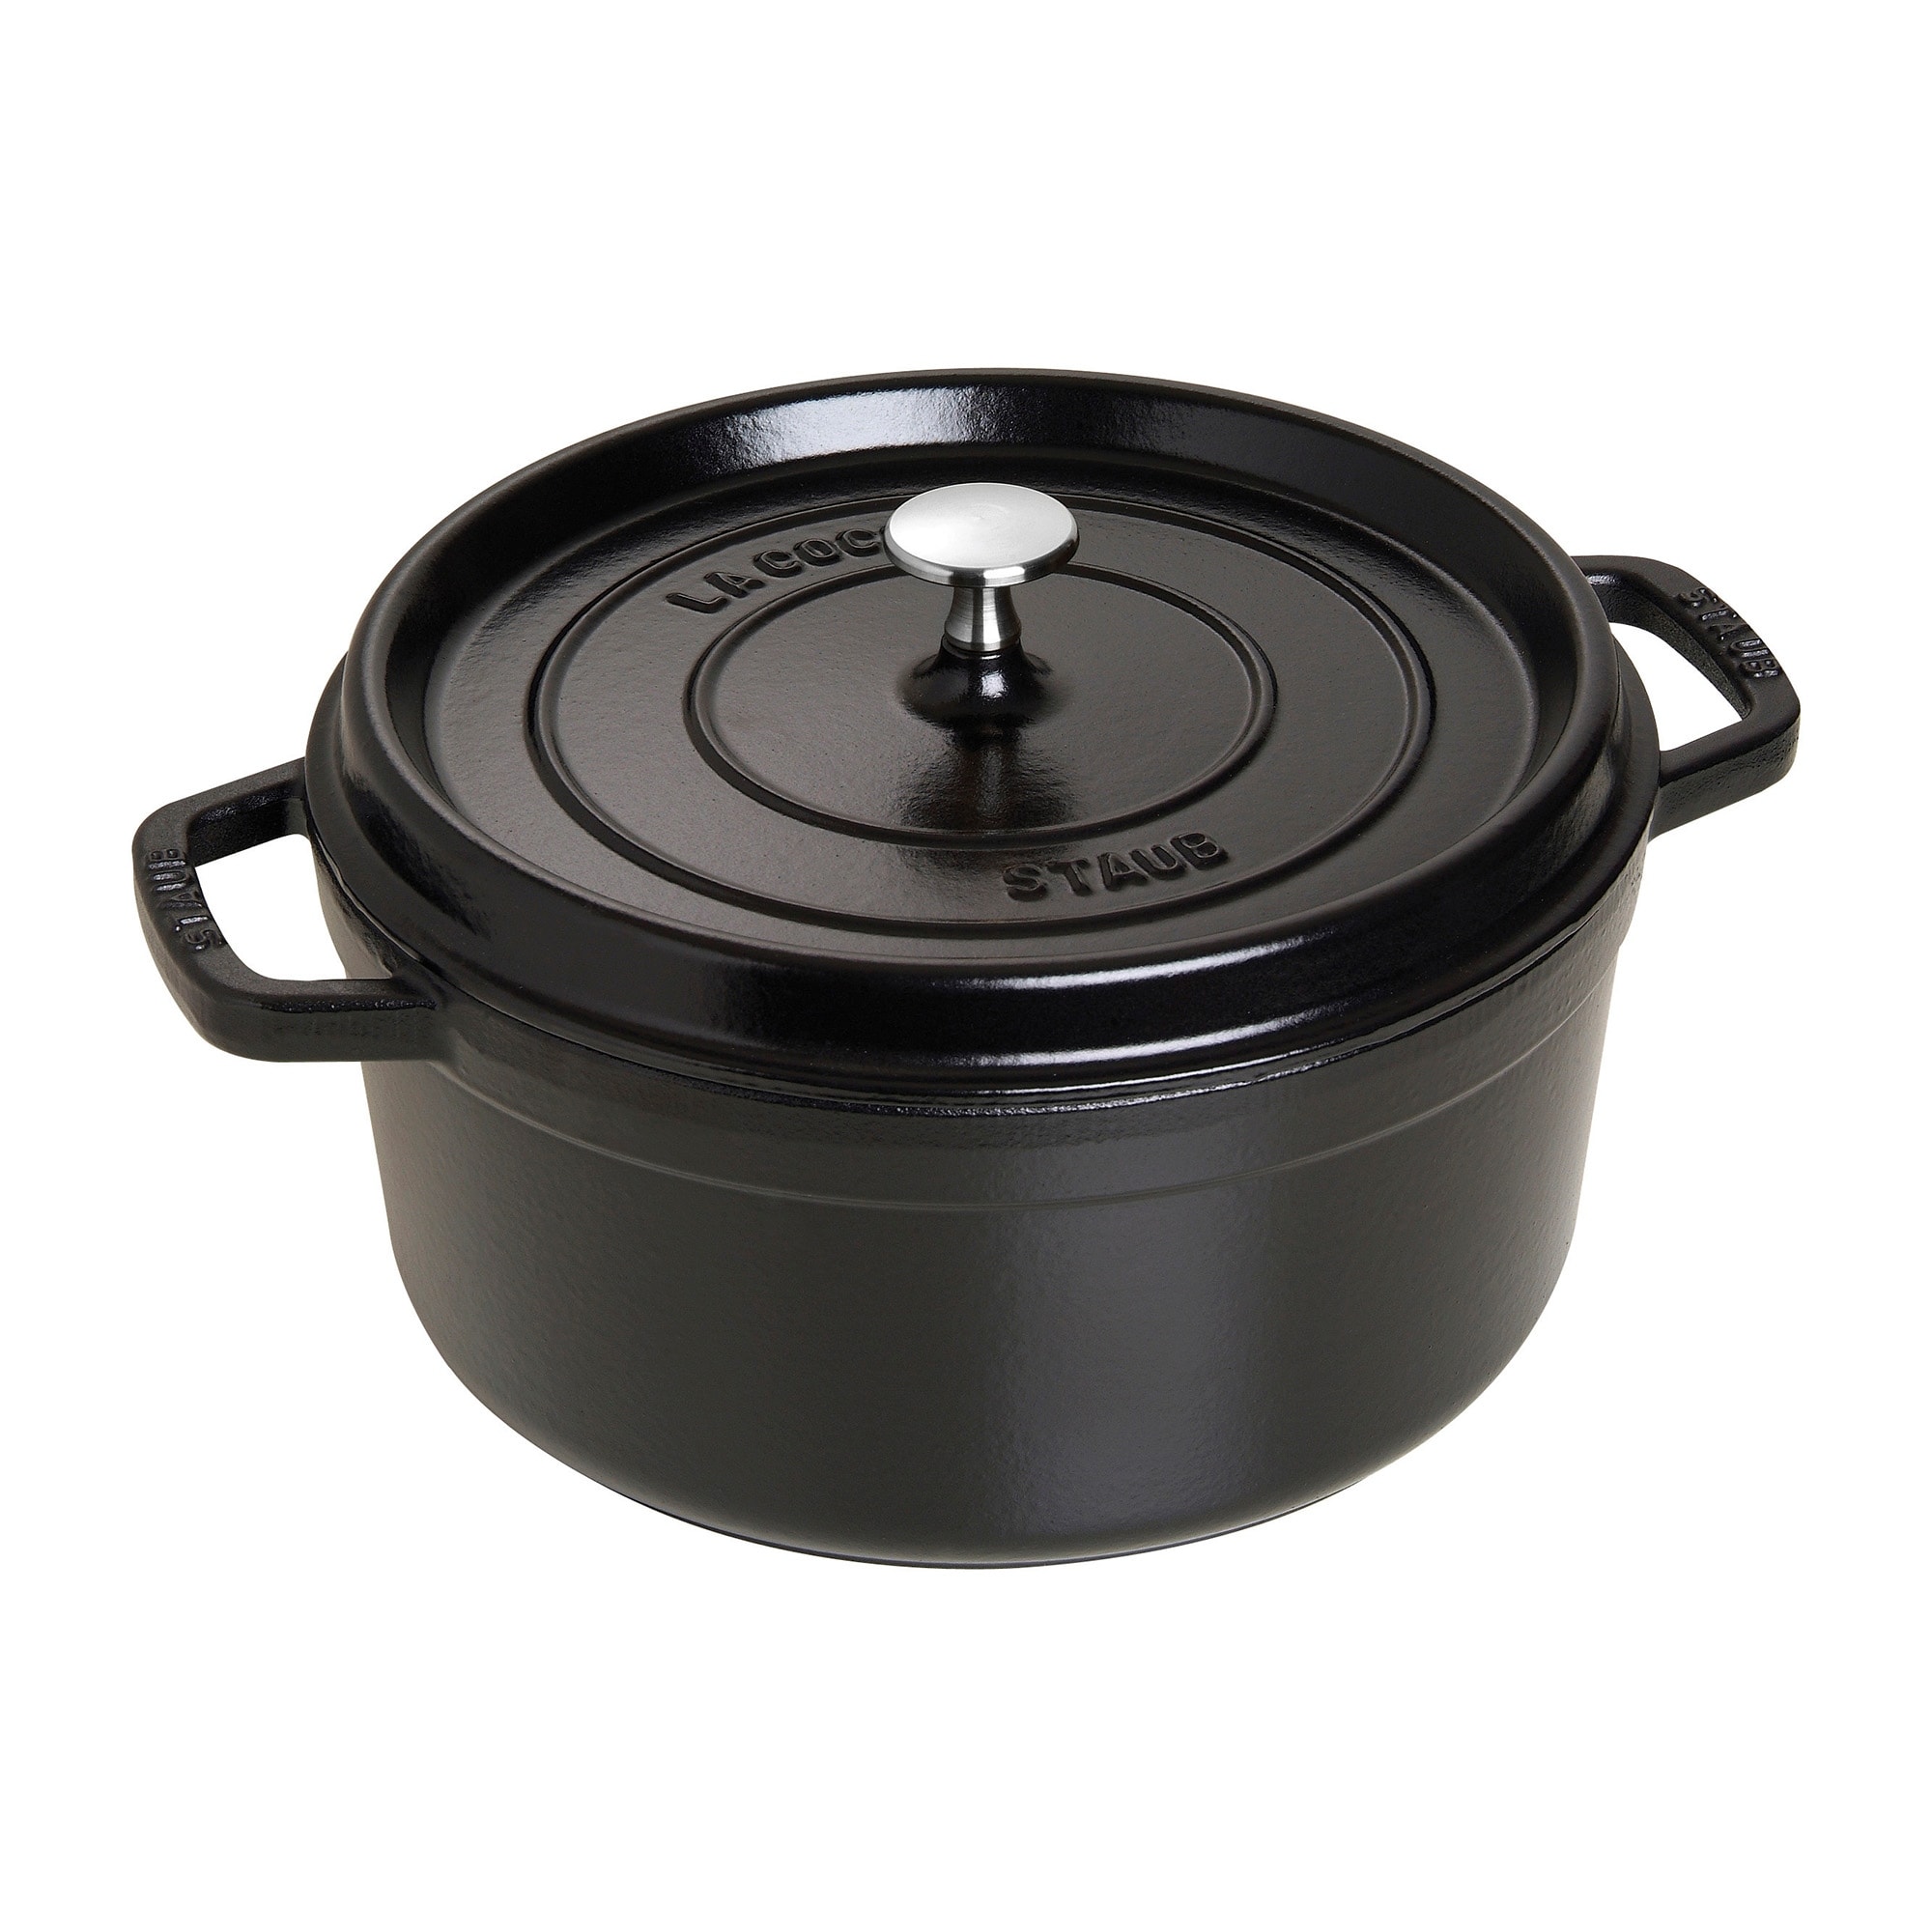 https://ak1.ostkcdn.com/images/products/is/images/direct/4045de4c4aab03c9e2016b12e62566734066f5ab/Staub-Cast-Iron-5.5-qt-Round-Cocotte.jpg